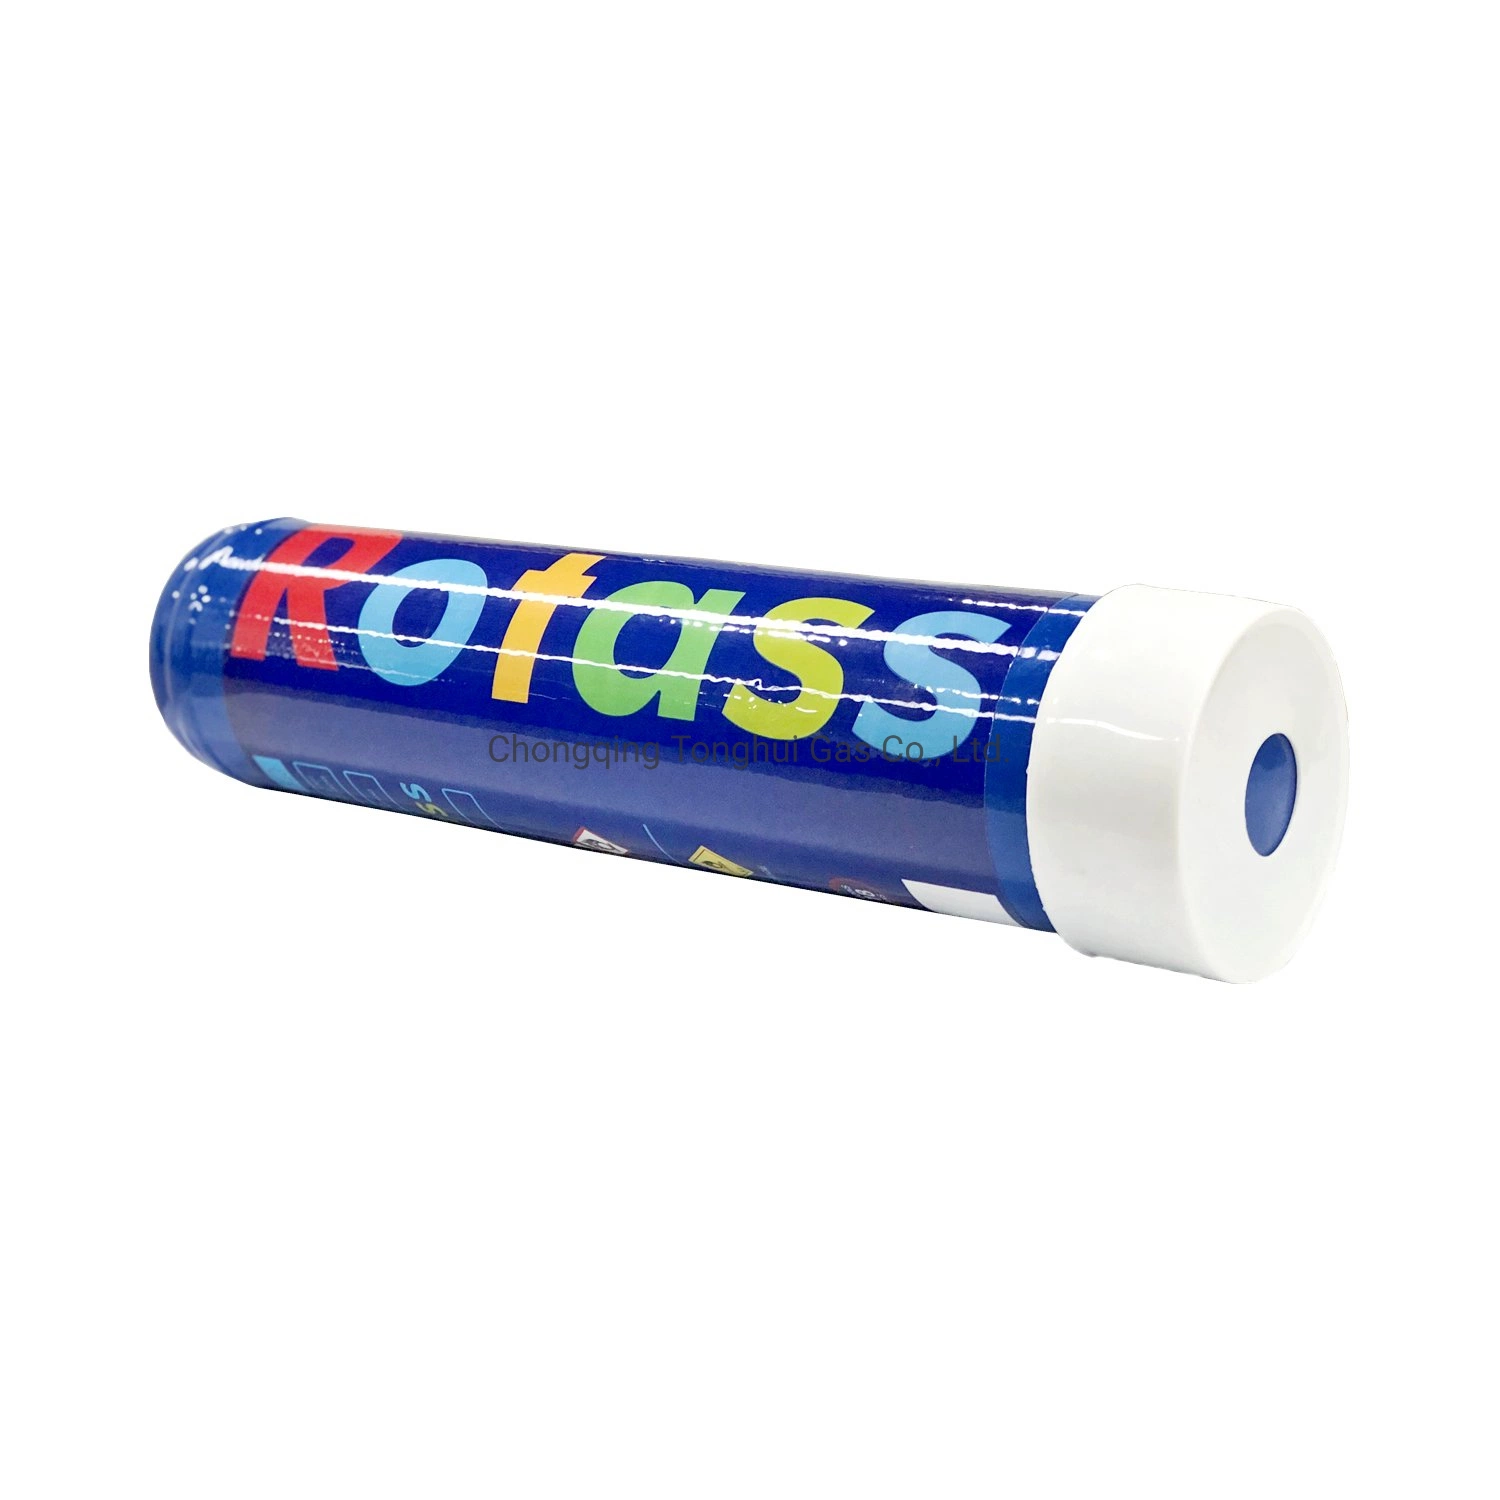 Rotass 99.95% Purity 615g 1L N2o Cartridge OEM Support Nitrous Oxide Laughing Gas Canister Whipped Cream Charger for Whip Cream